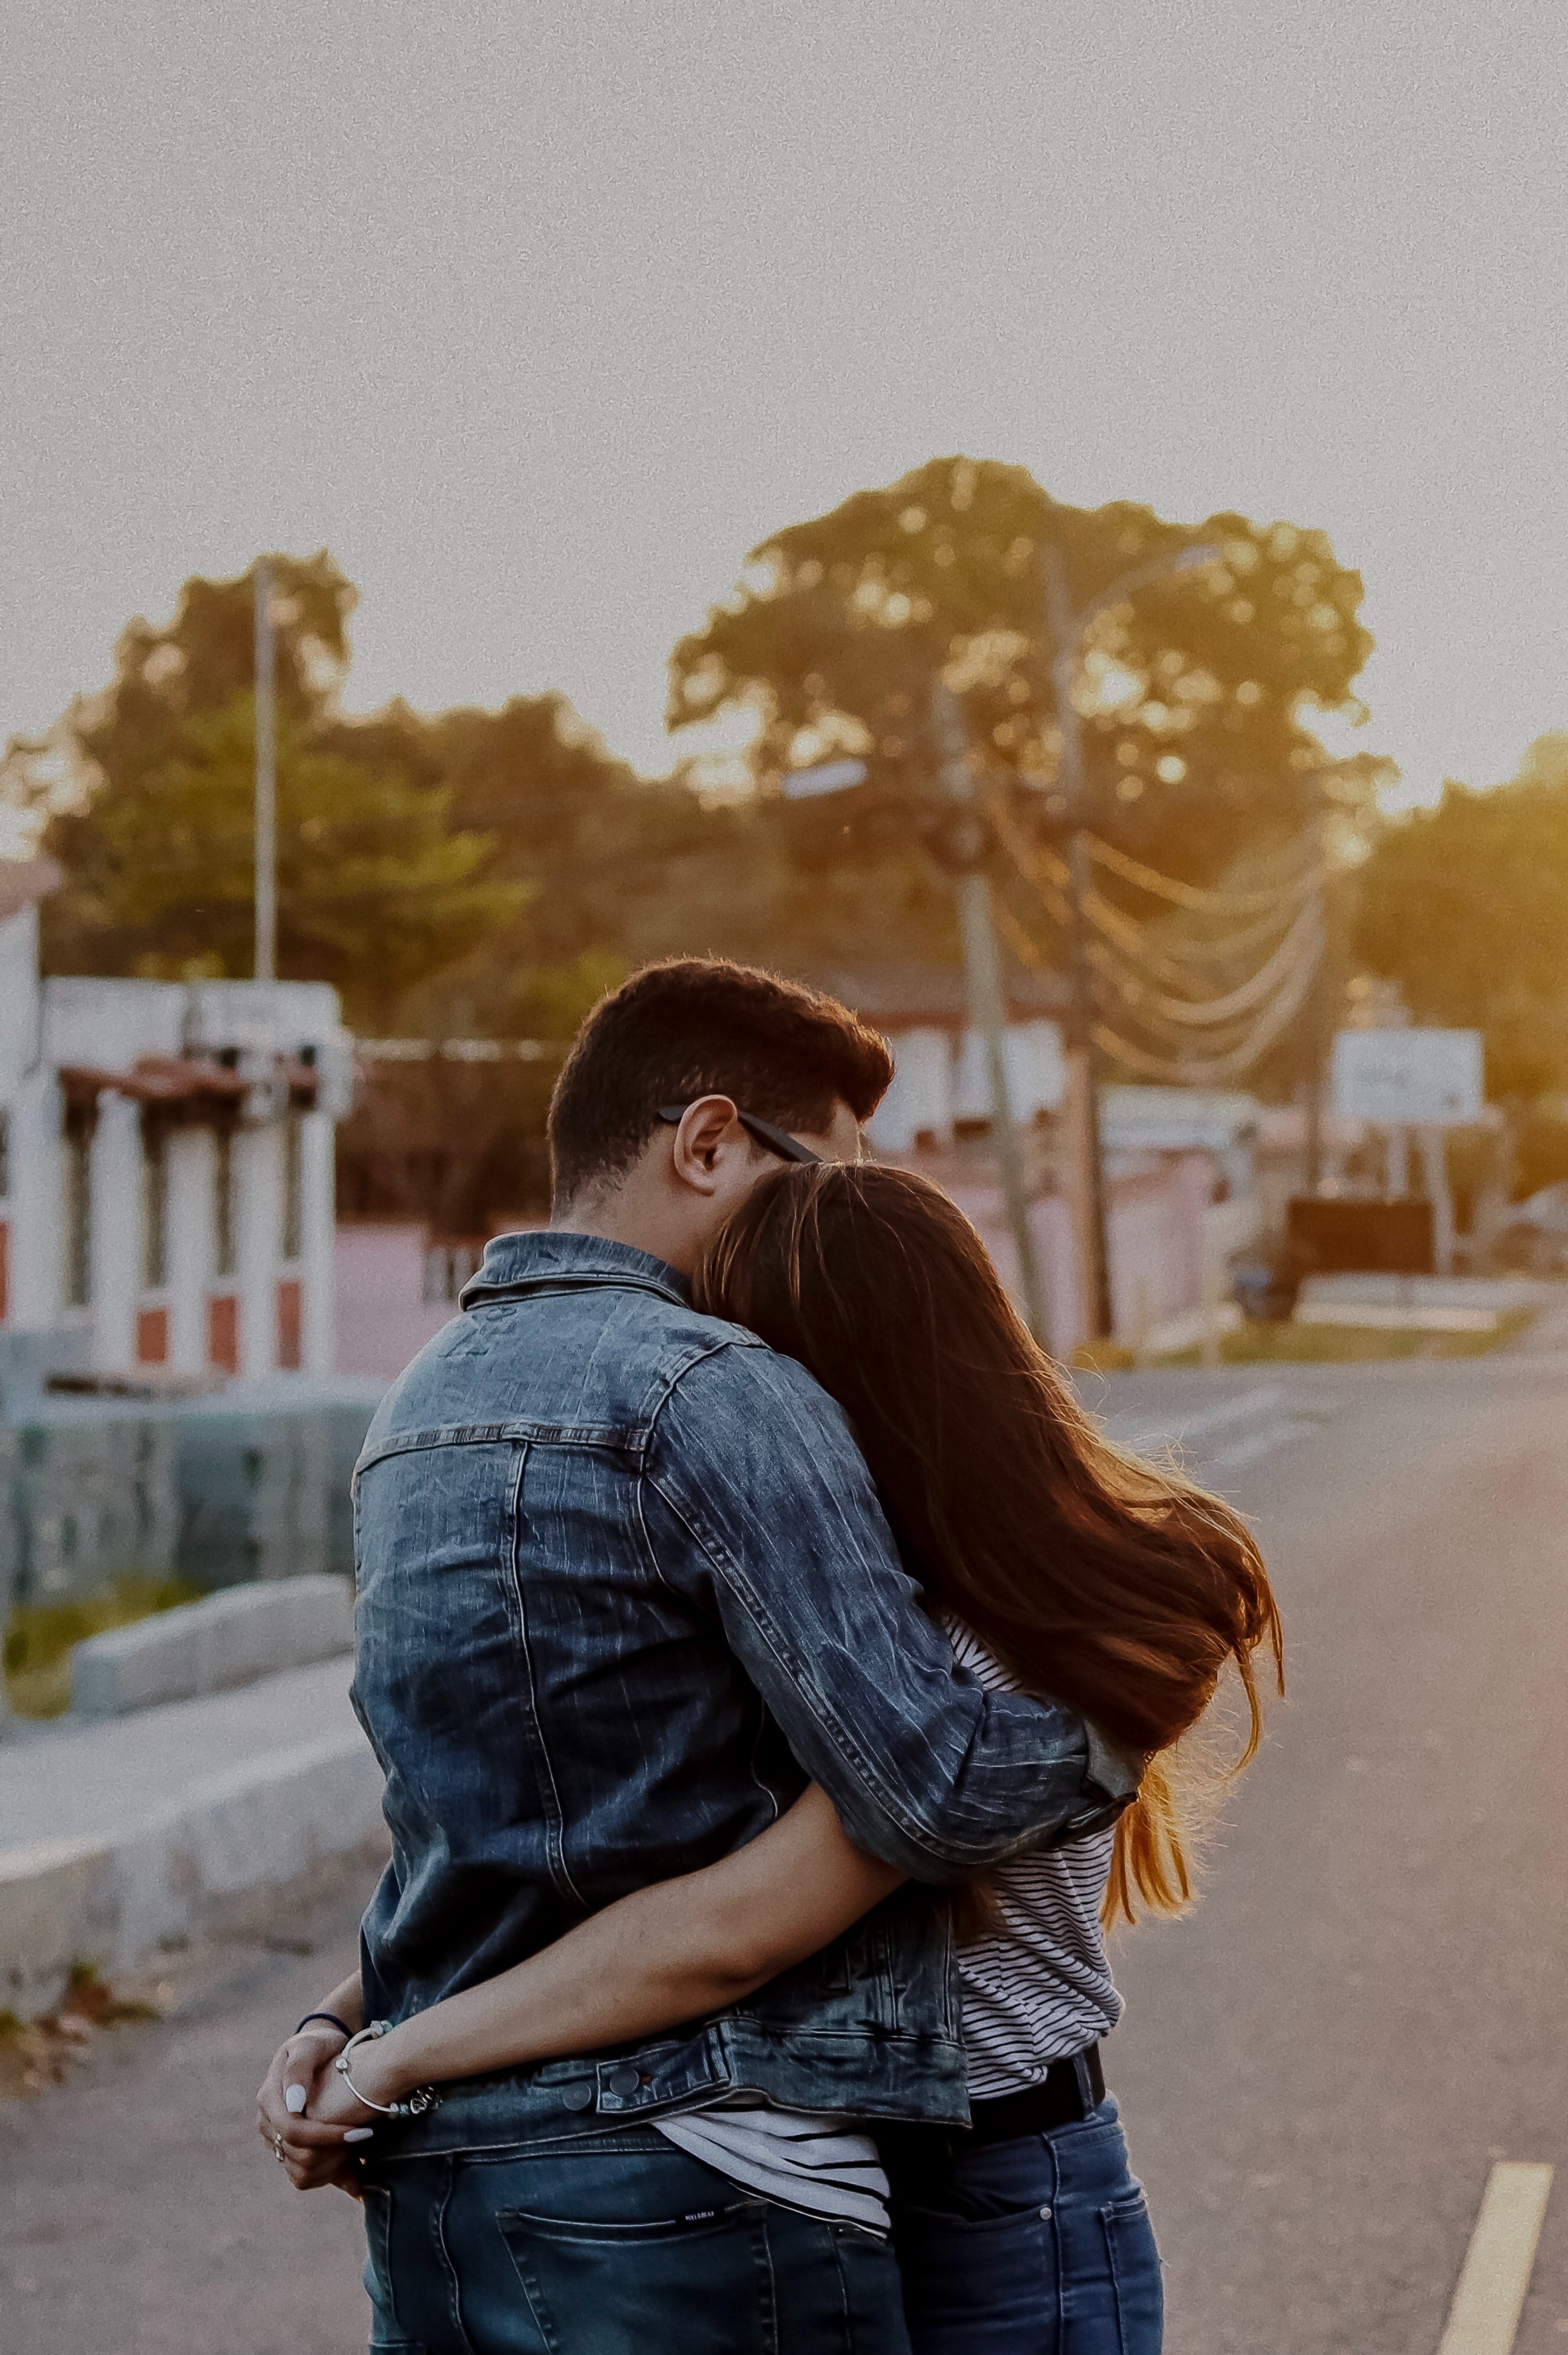 A young couple | Source: Pexels